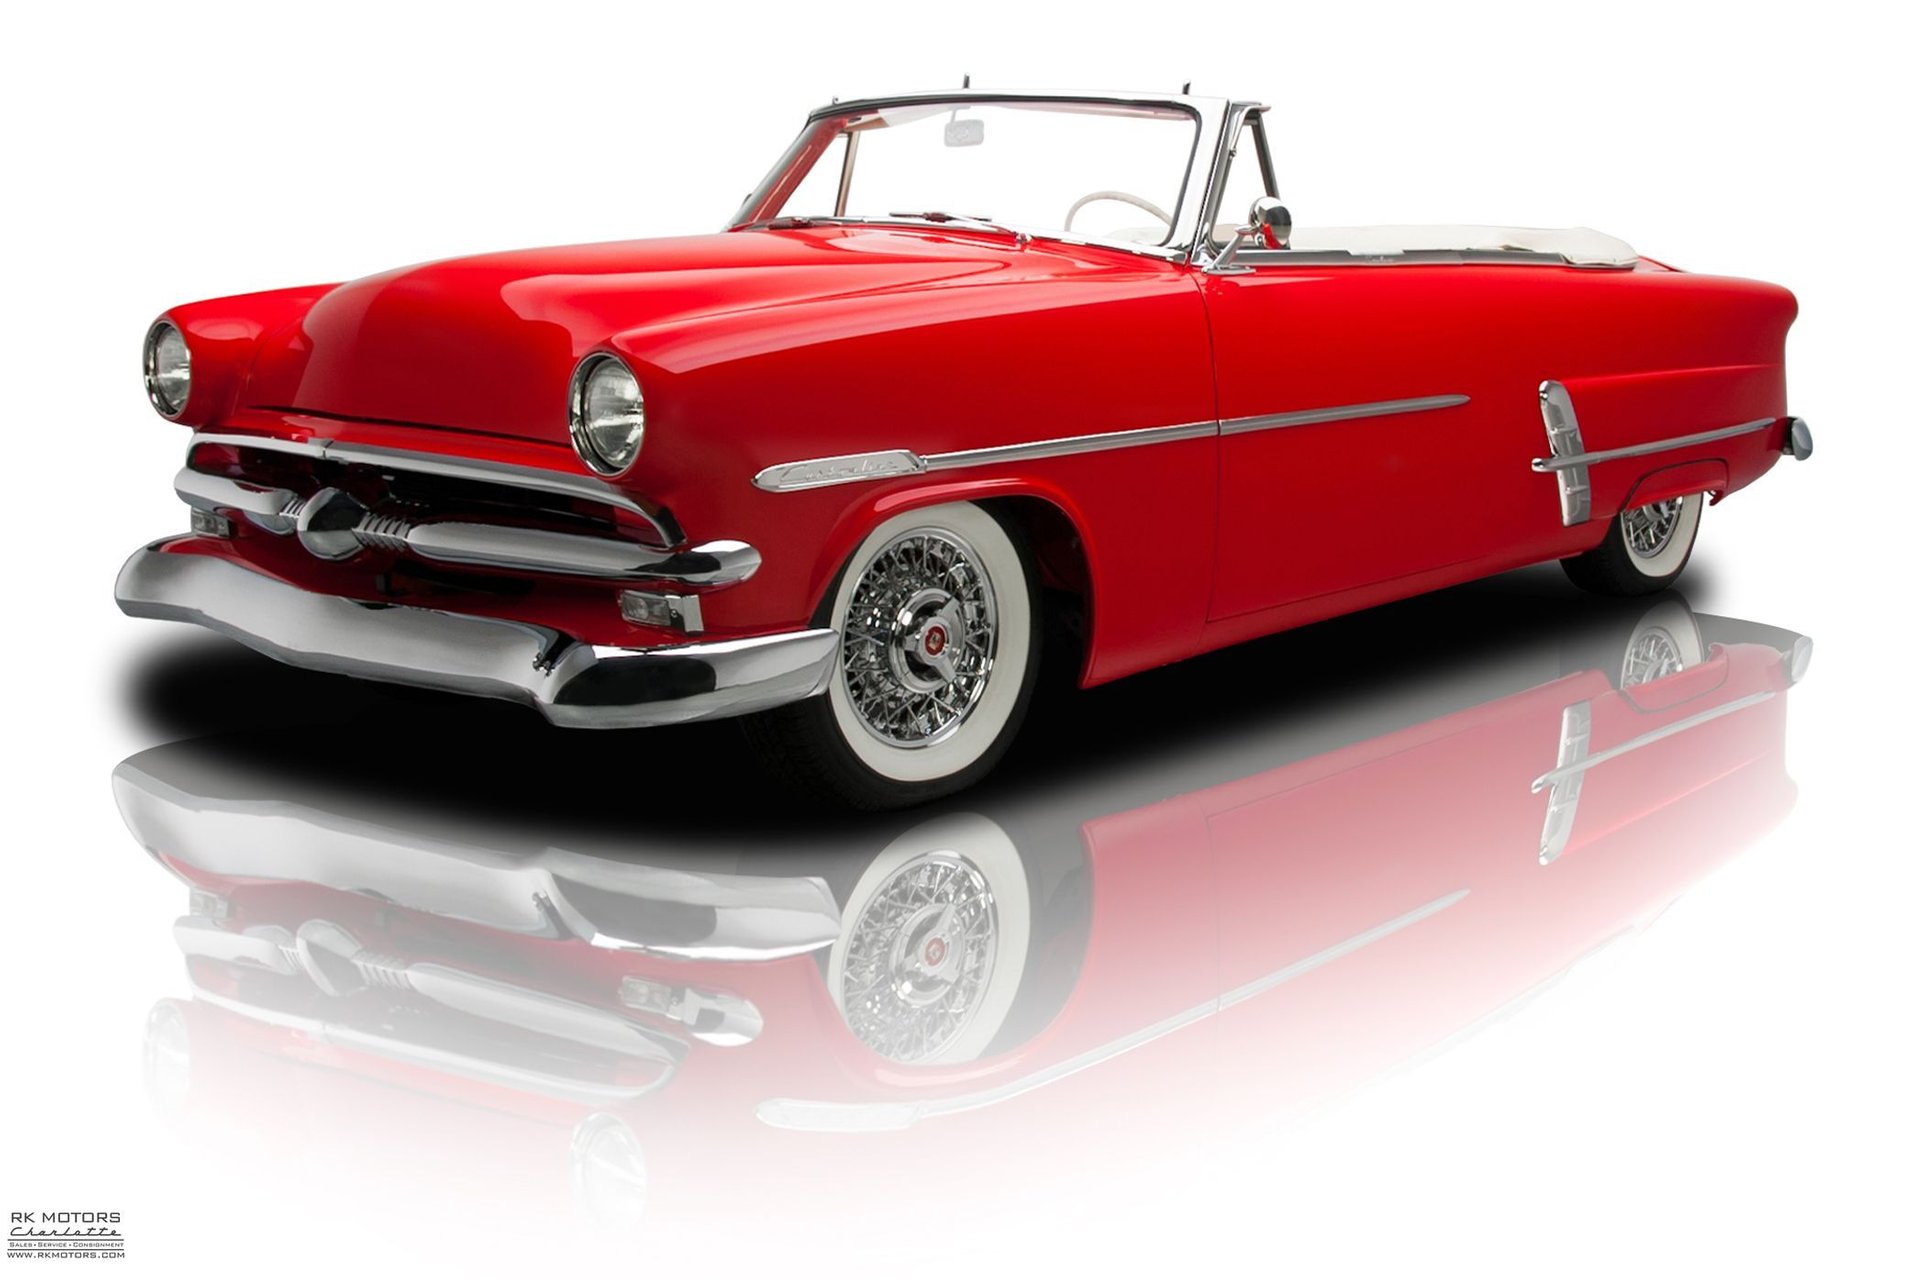 Factory Photo Ref. # 42435 1953 Ford Crestline V8 Sunliner Convertible Coupe 